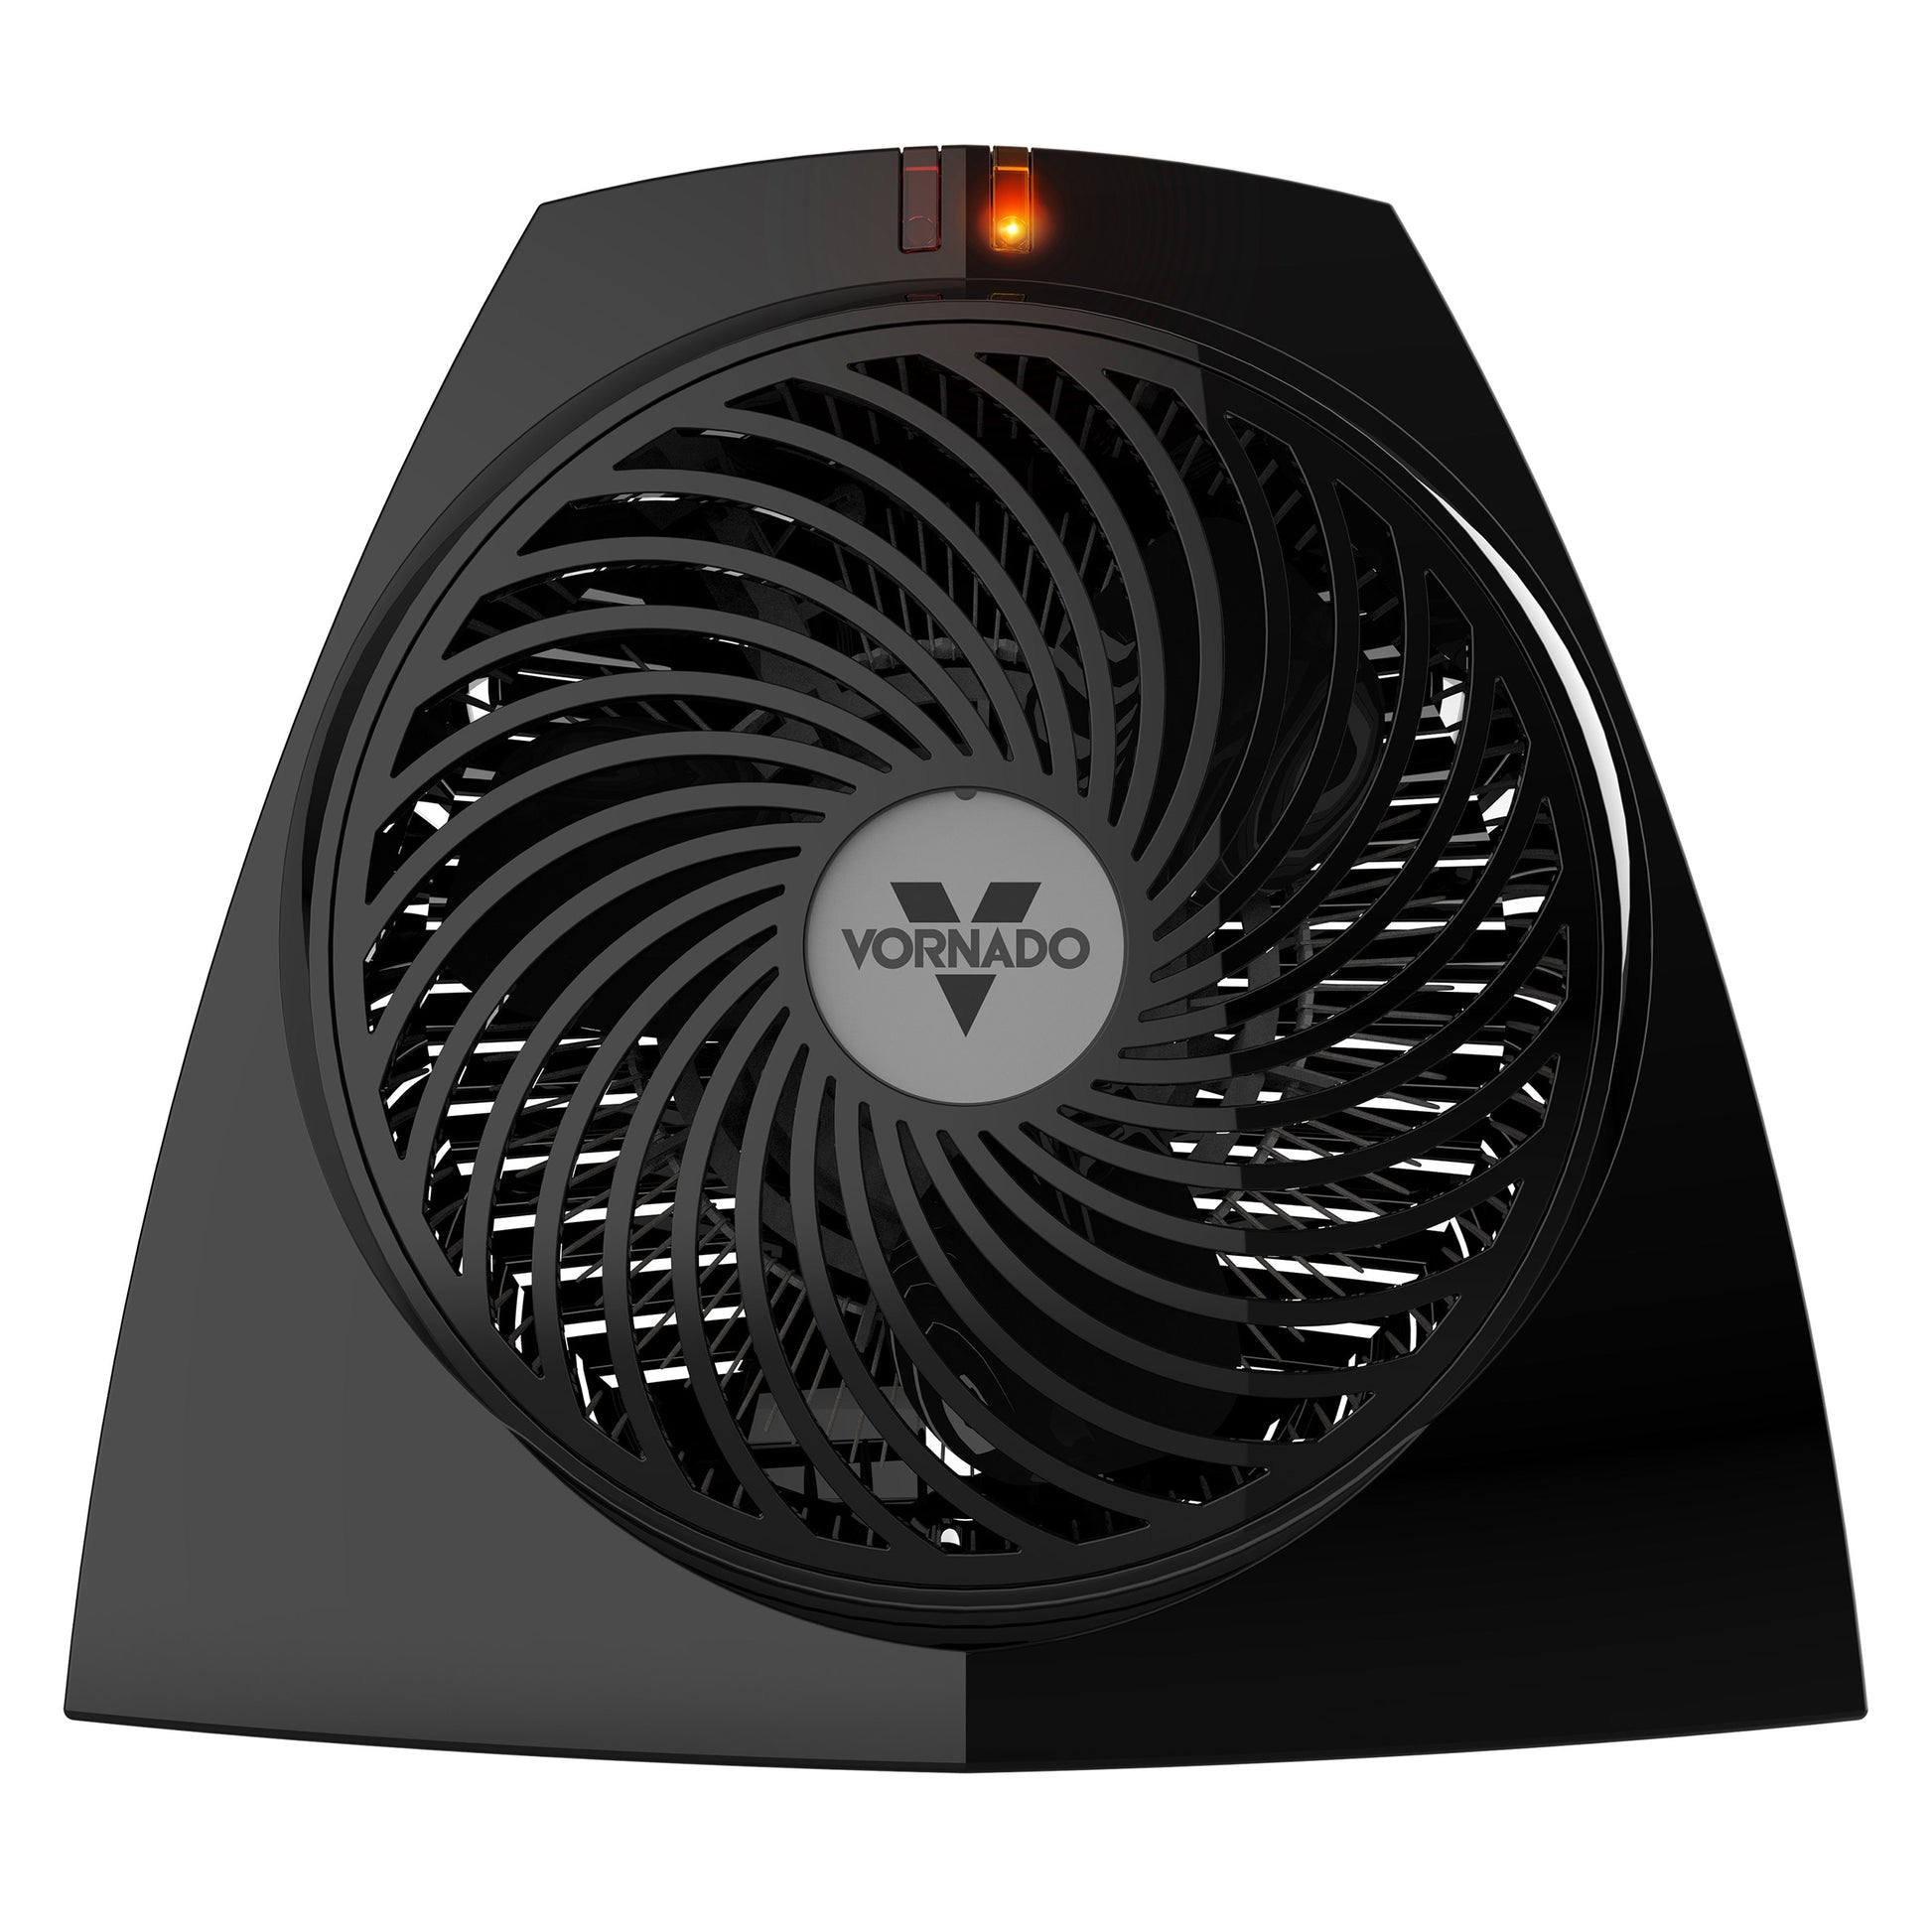 Vornado VH203 Personal Space Heater - Pack of 2